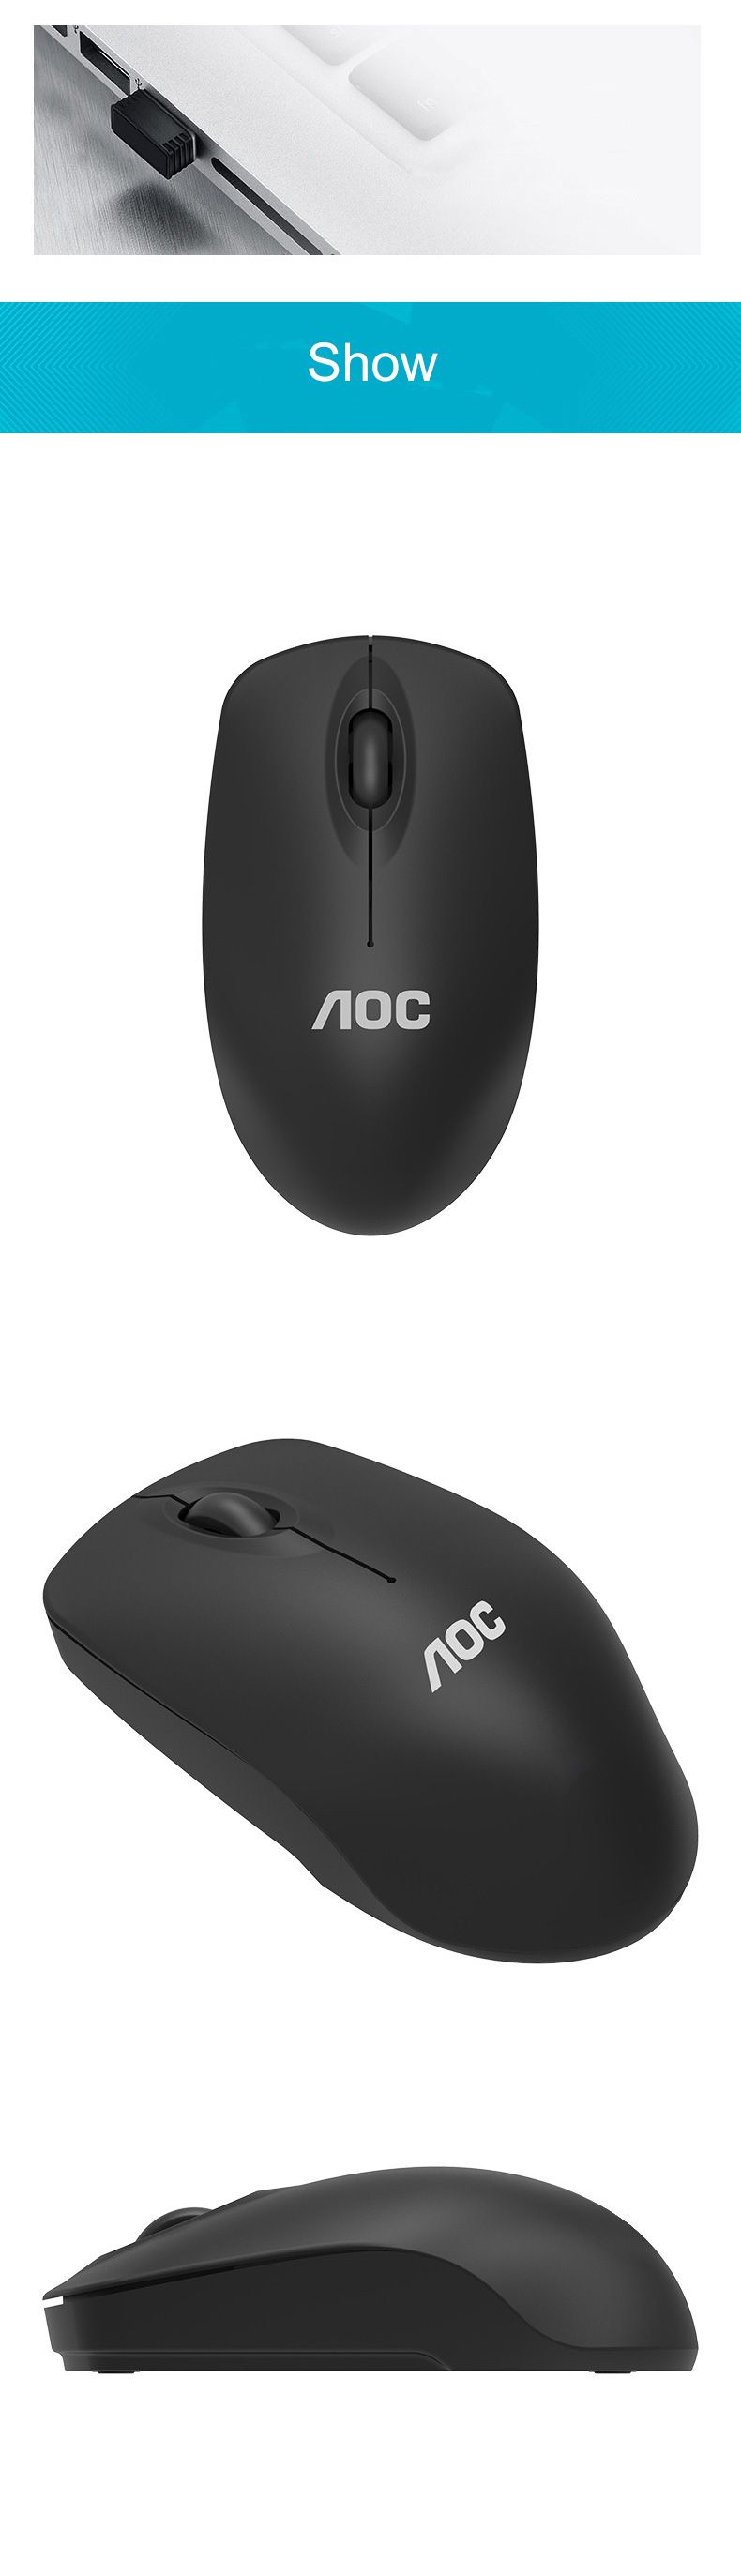 AOC-MS320-Wireless-Mouse-24GHz-USB-Receiver-Gaming-Optical-Game-Mice-For-Laptop-PC-Computer-1619437